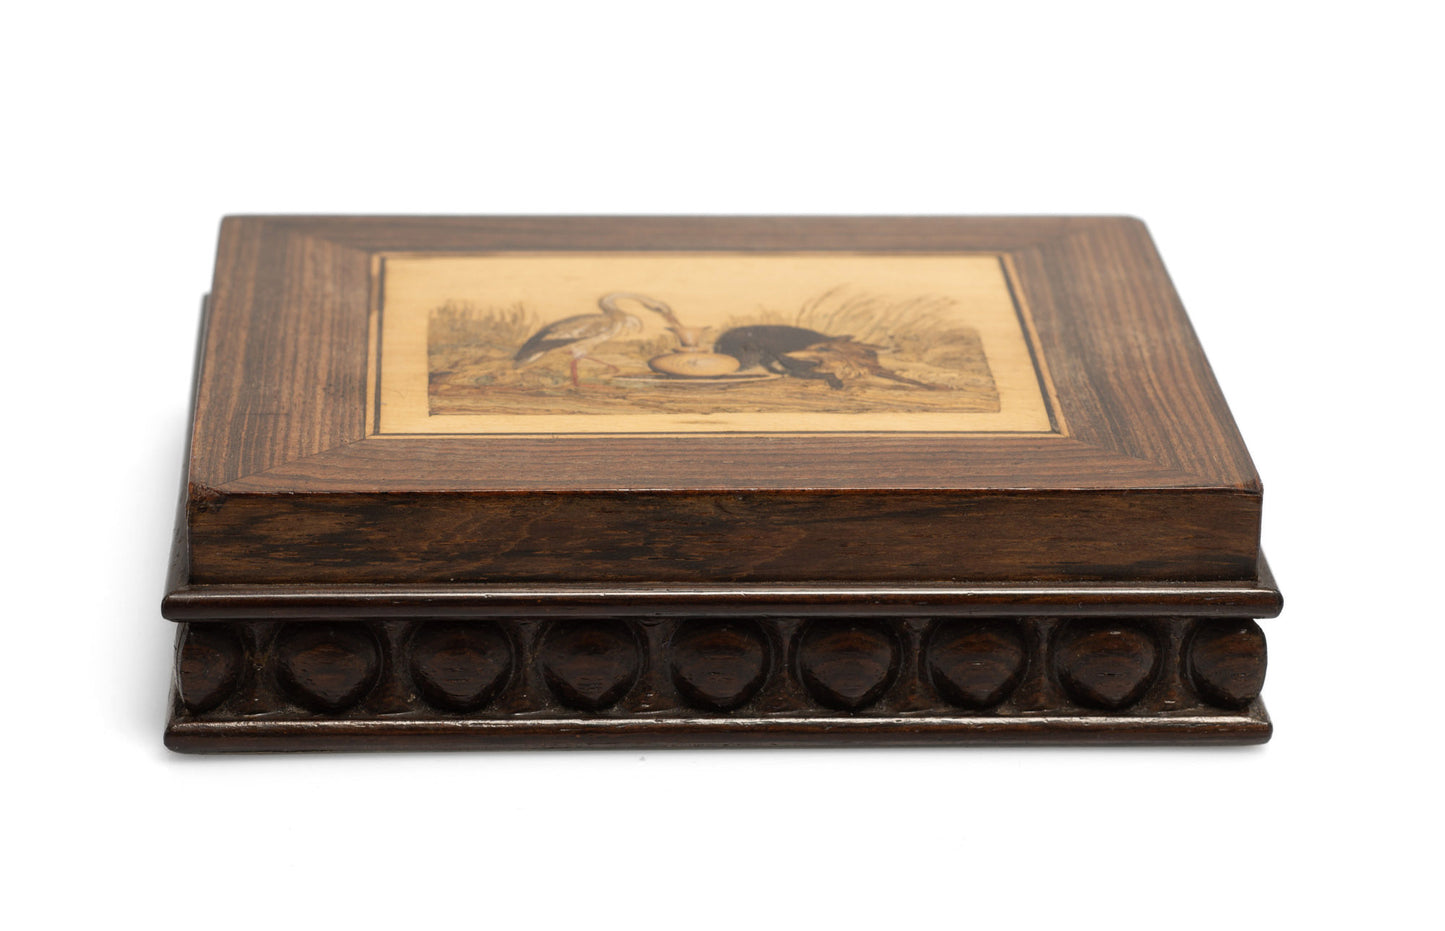 Superb Antique Carved Wood & Marquetry Desk Weight/Paperweight Fox & Stork c1840 (Code 2658)